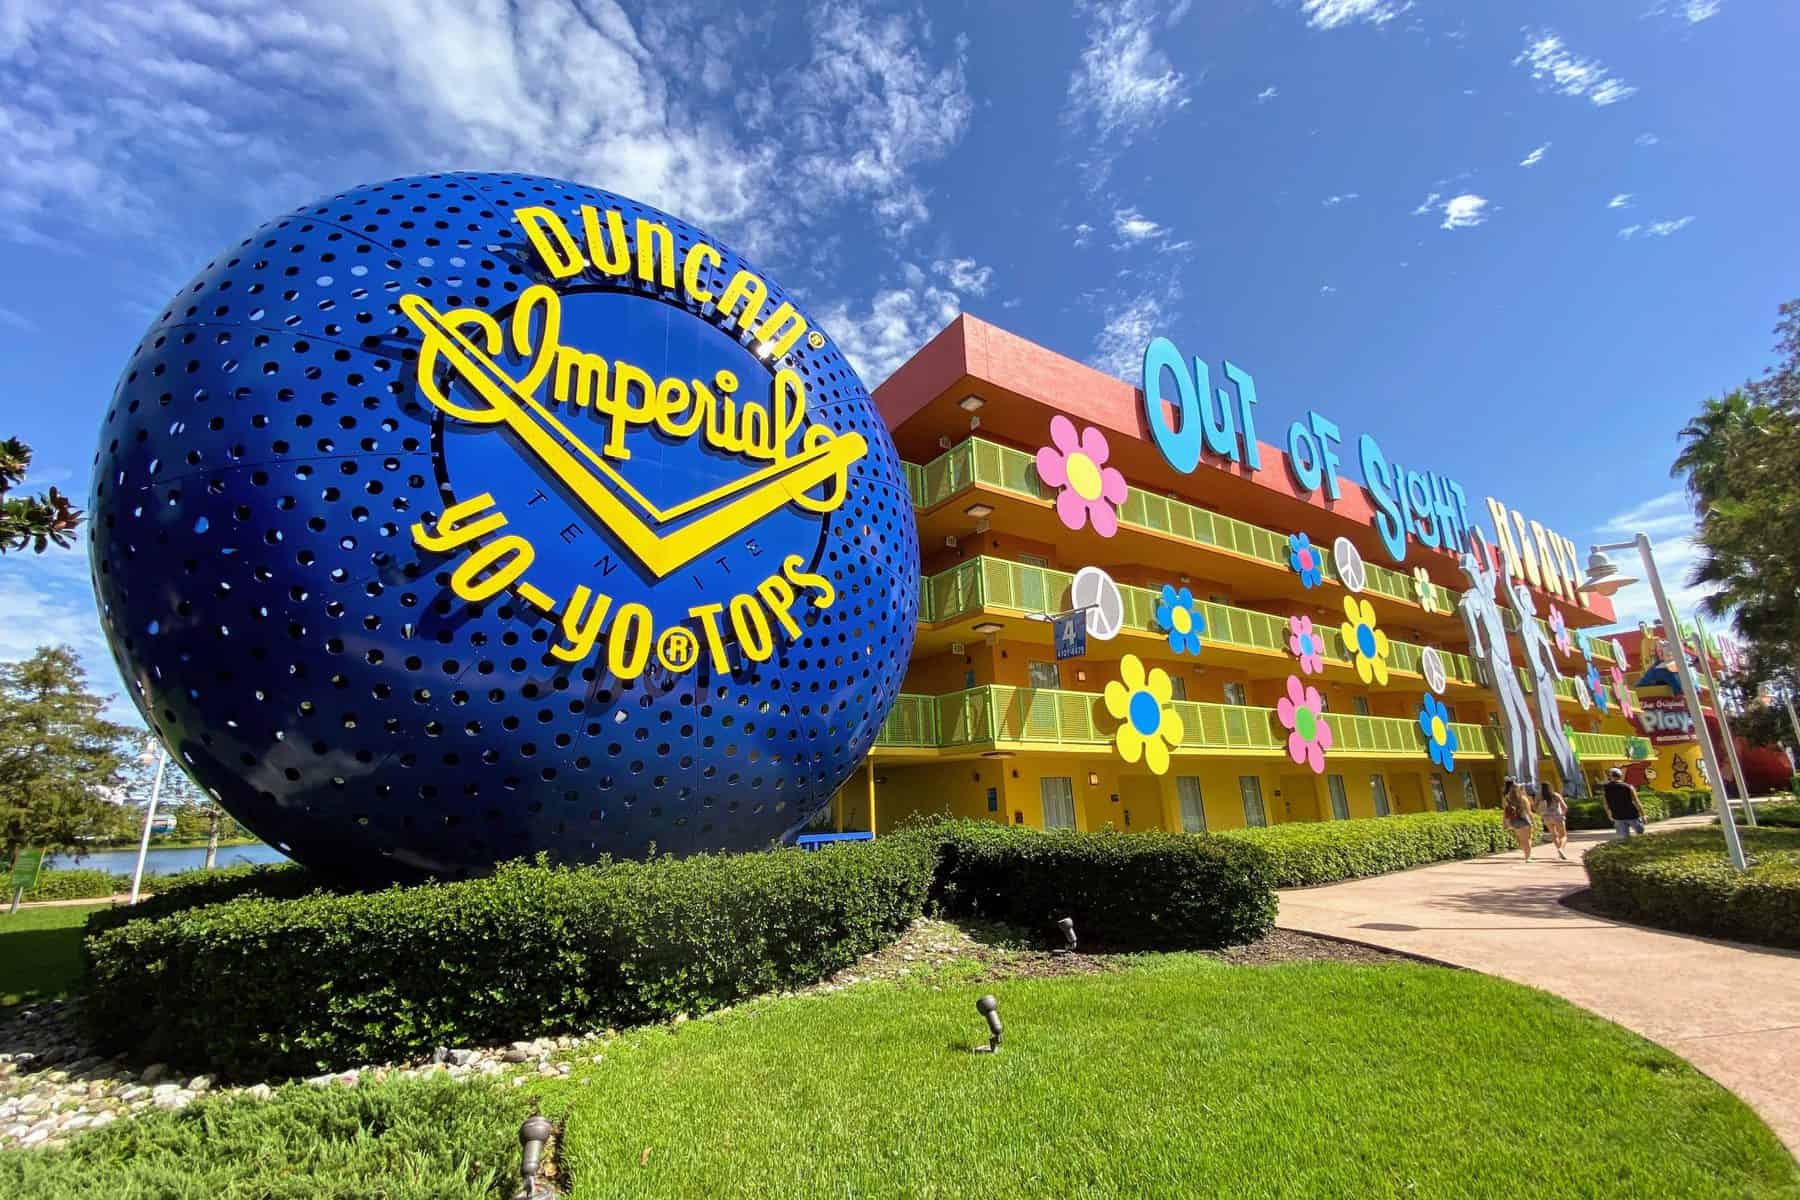 List of All Disney World Resort Hotels (with addresses & phone numbers)